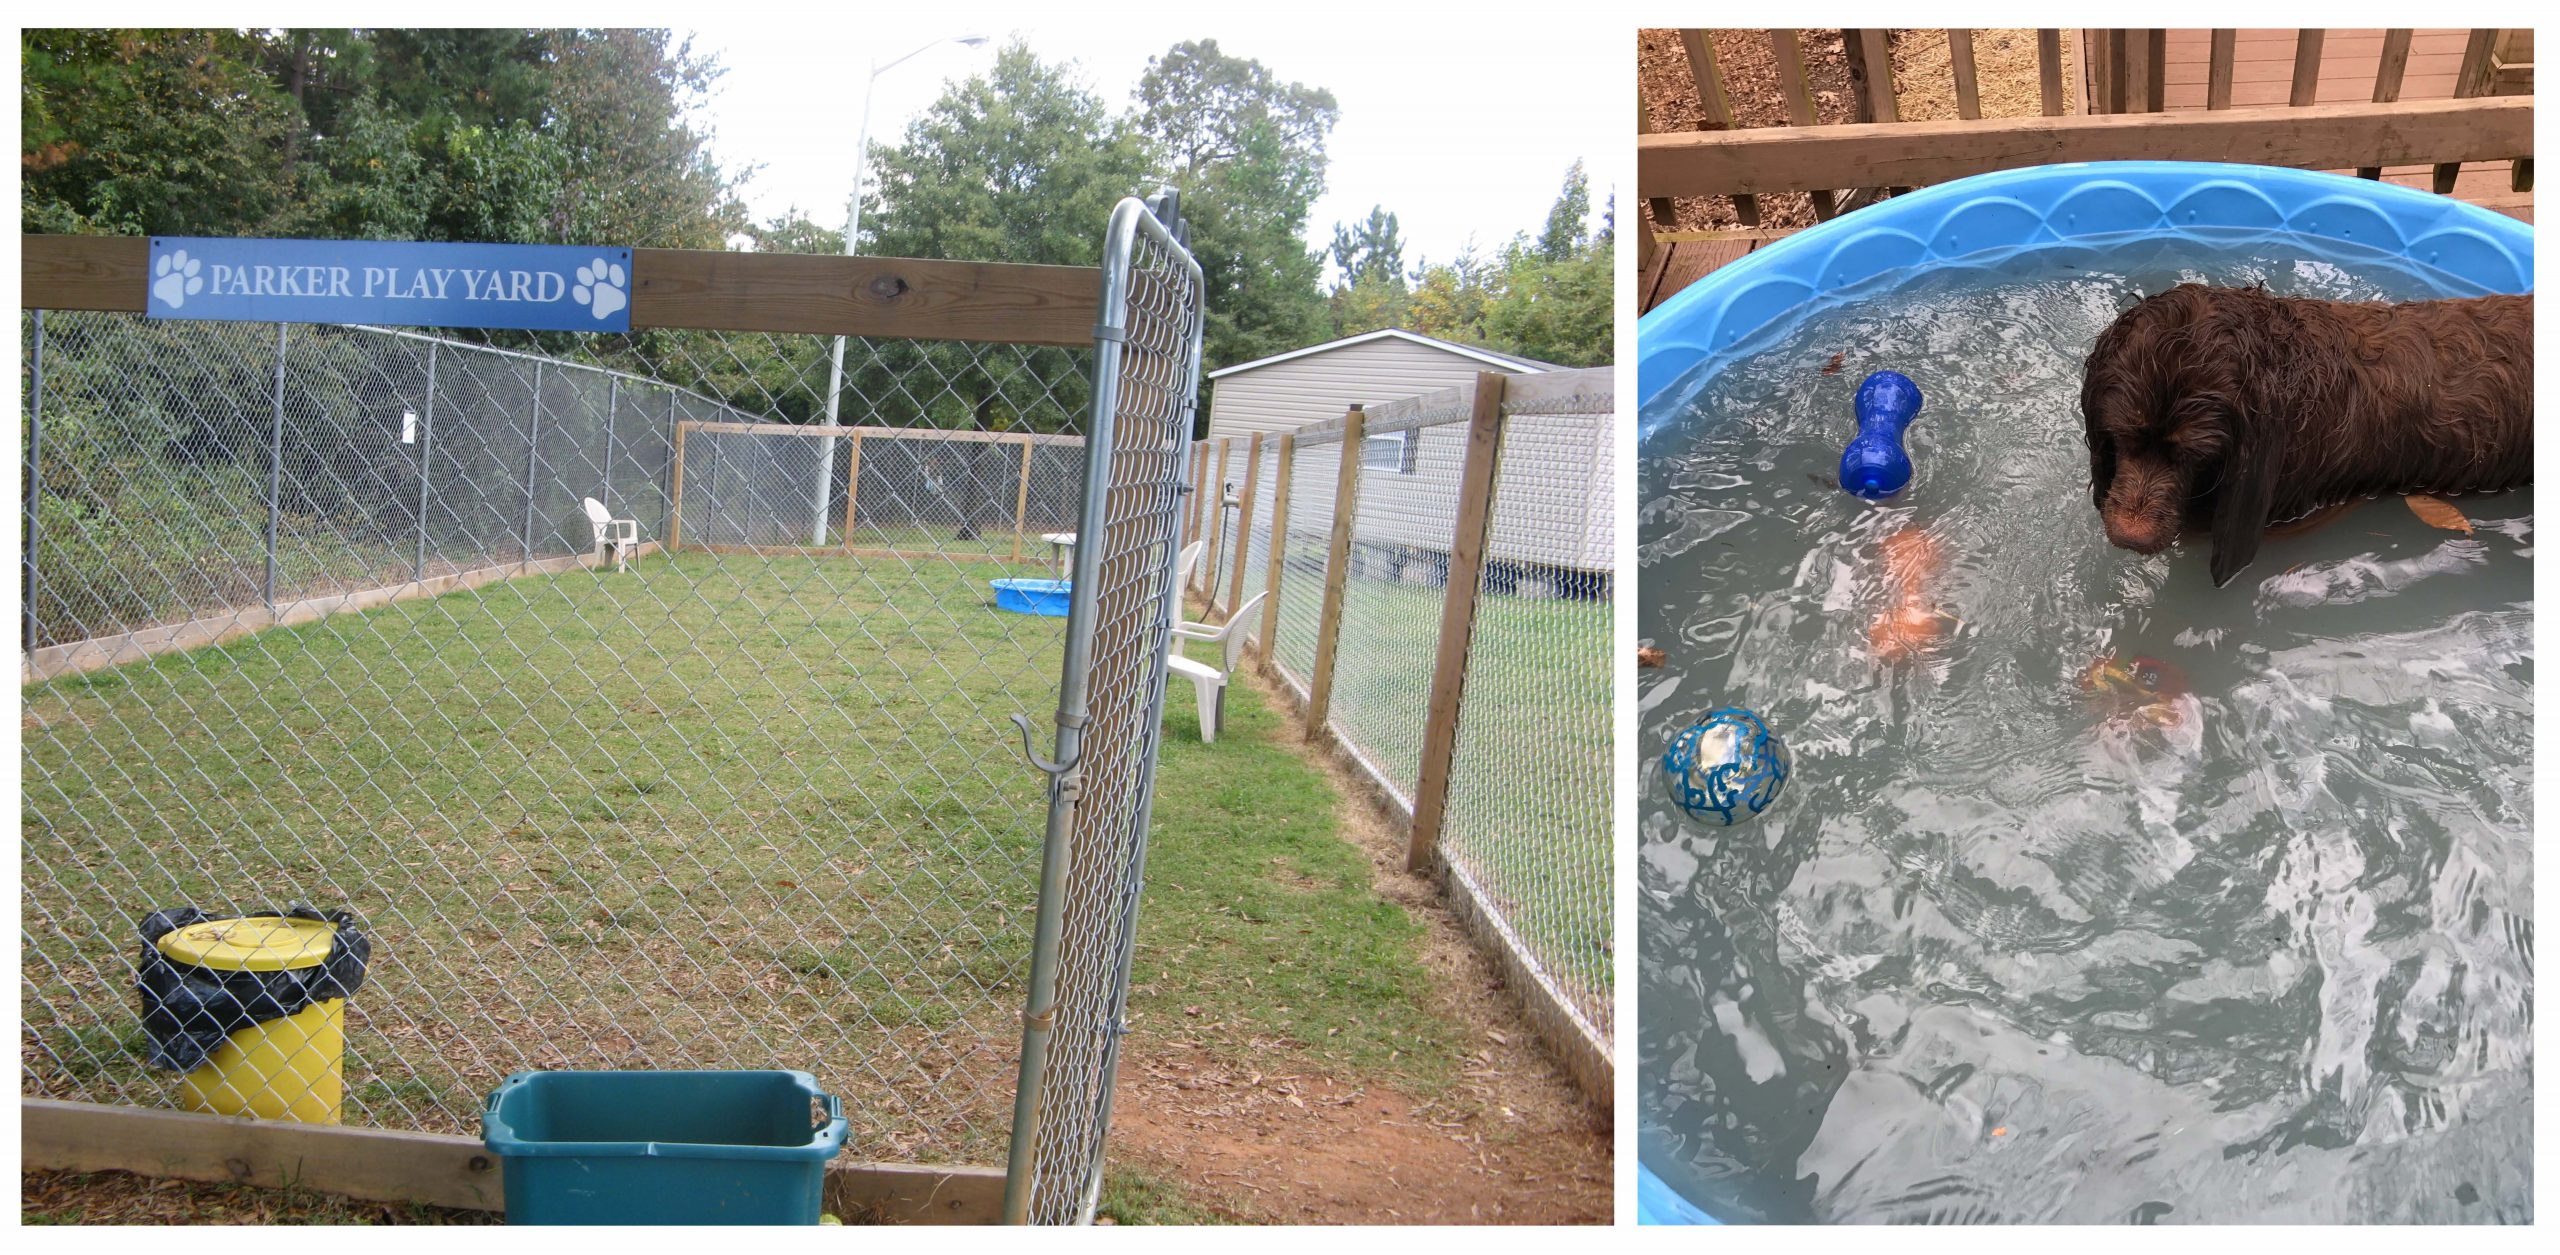 (Left) an outdoor fenced play yard with grass; (Right) a dog wades in a kiddie pool with floating toys